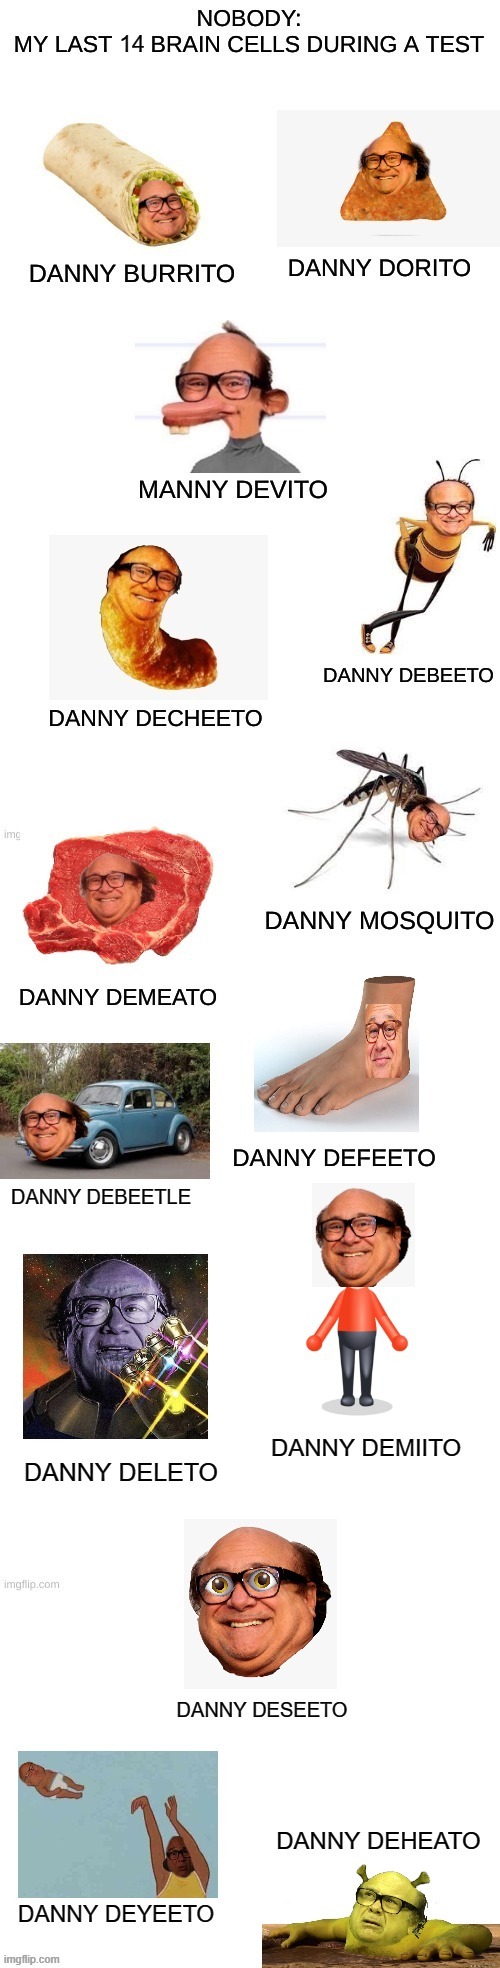 this took so long to make |  14 | image tagged in danny devito,meme,this took so long to make,aaaahhhh,oh hi how are you | made w/ Imgflip meme maker